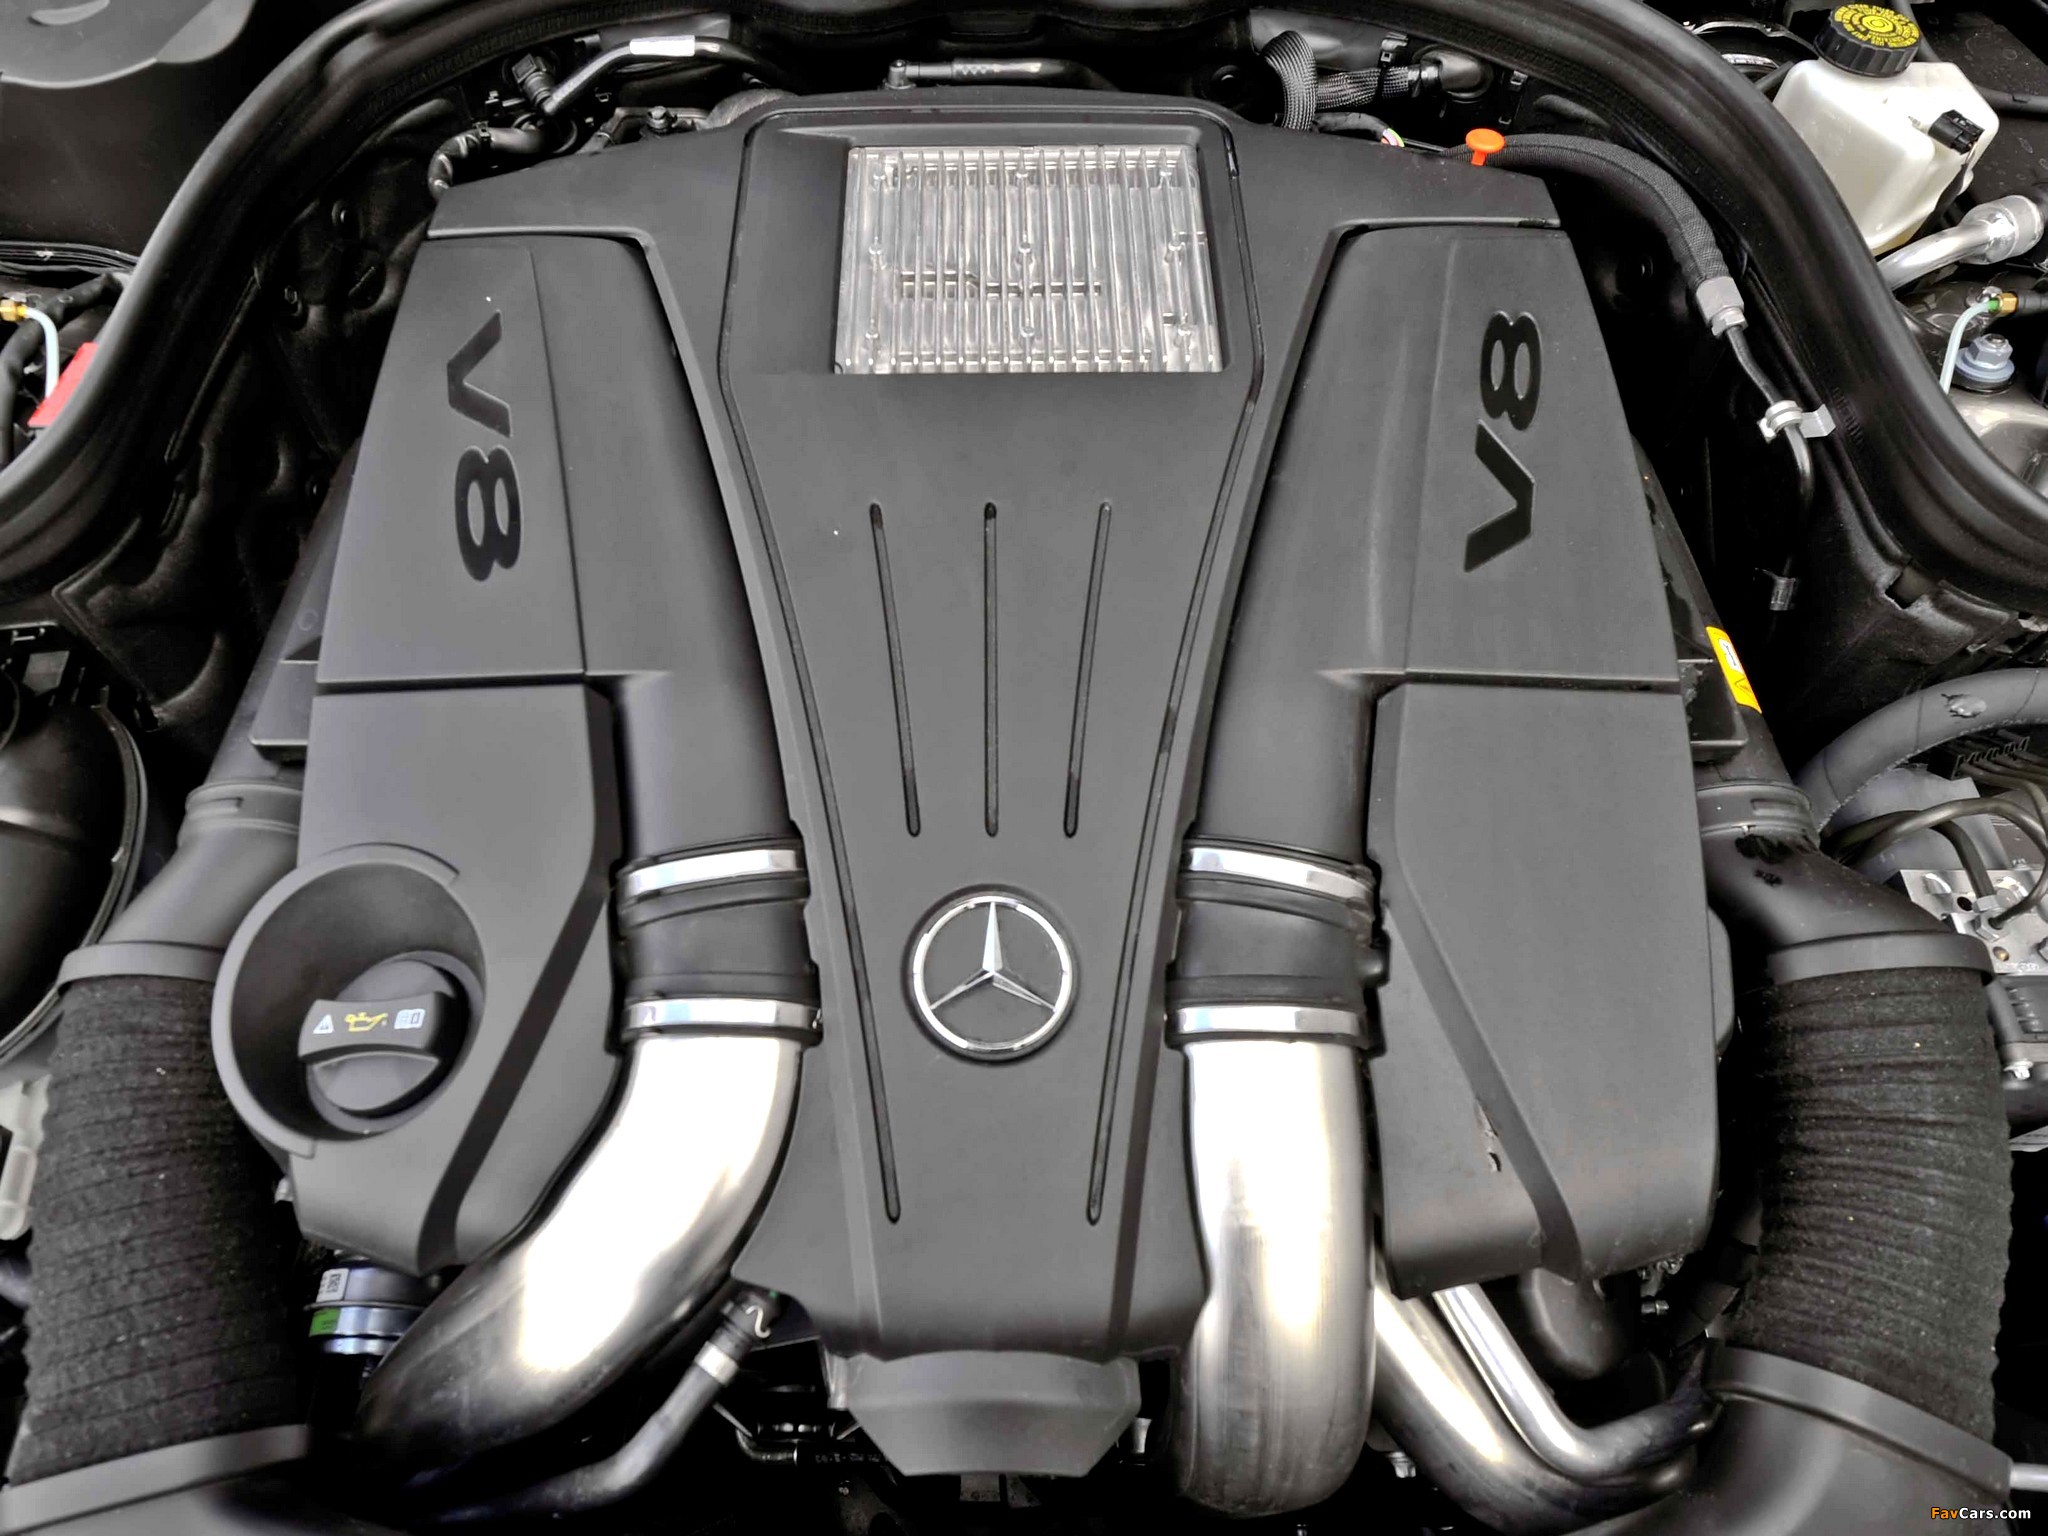 Mercedes-Benz CLS 550 AMG Sports Package (C218) 2010 images (2048 x 1536)